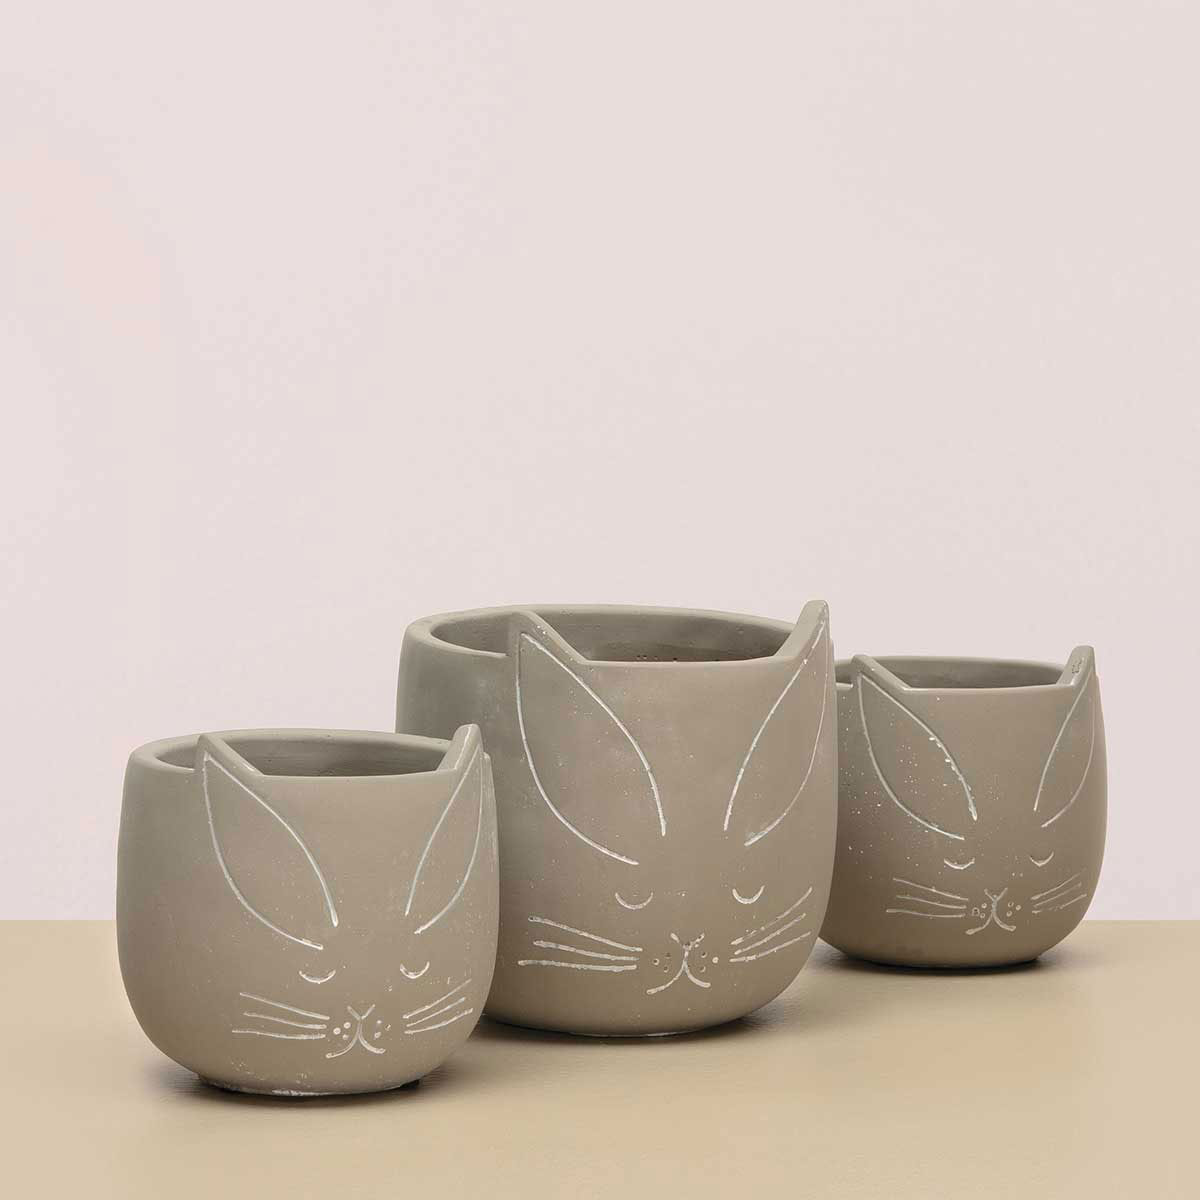 b50 POT BUNNY FACE GREY SMALL 4.5IN X 4.5IN CONCRETE - Click Image to Close